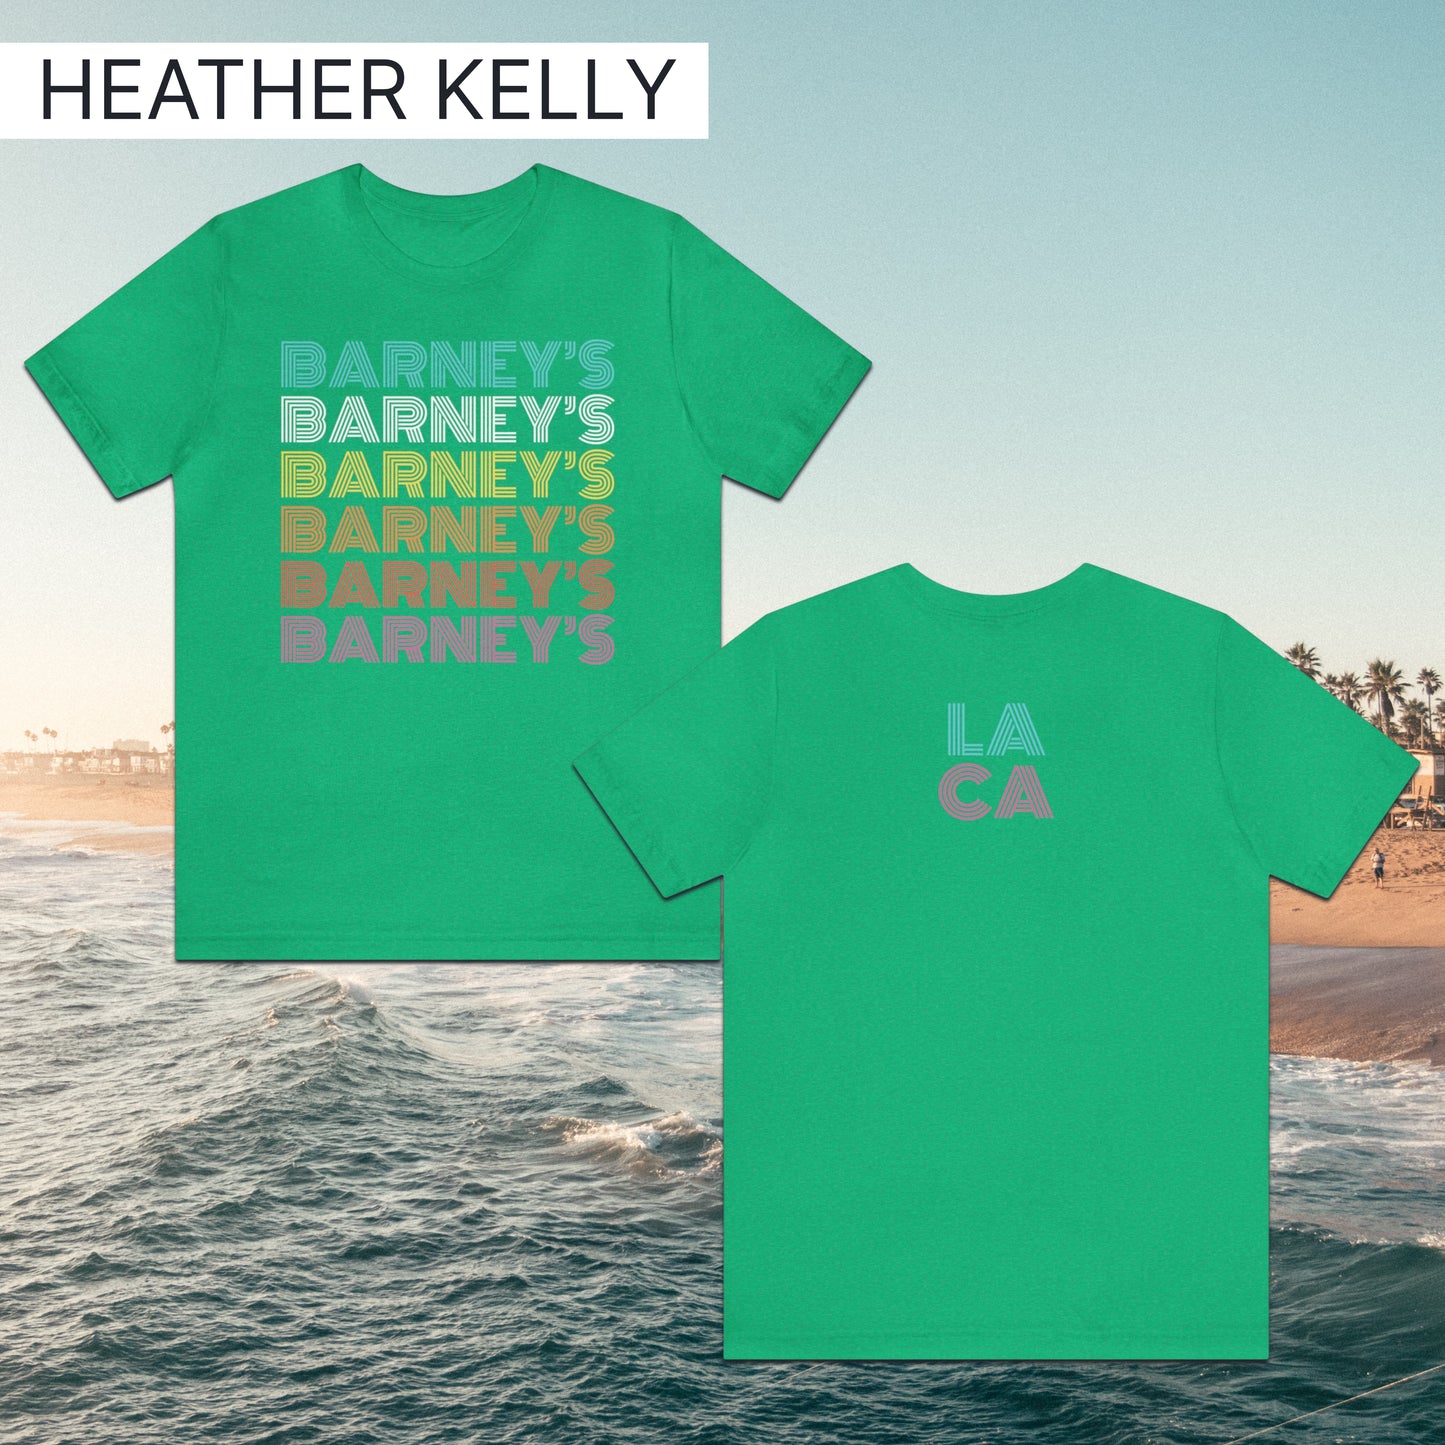 Barney's x6 Retro Hollywood | BARNEY'S BEANERY - Women's Retro Graphic Tee | Heather Kelly Bella+Canvas 3001 T-Shirt - Front And Back Flat Lay View